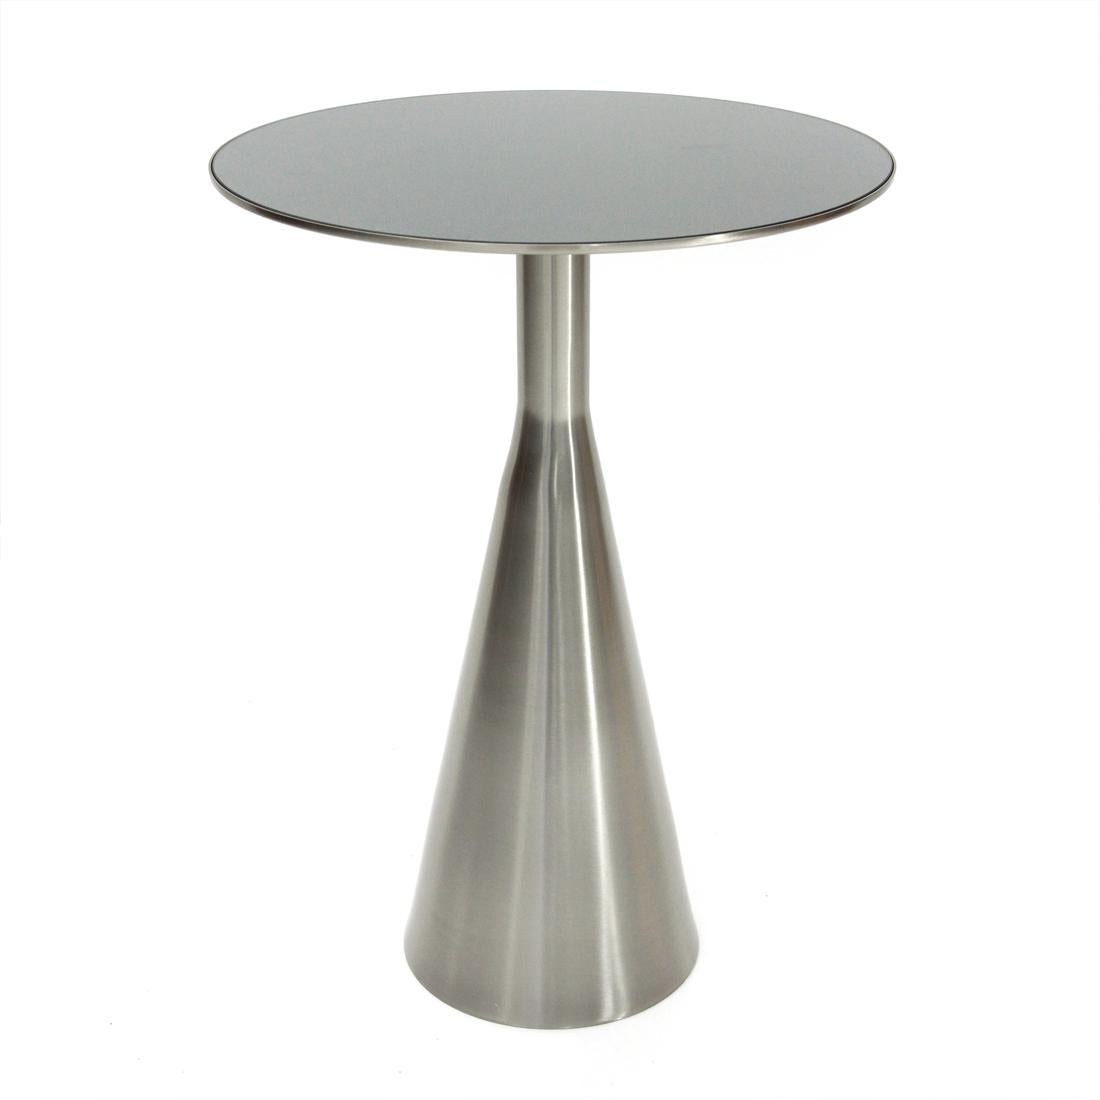 Small table of contemporary manufacture produced in small series by Italian artisans.
Brushed chrome frame.
Mirror glass top.

Dimensions: Diameter 45 cm, height 60 cm.